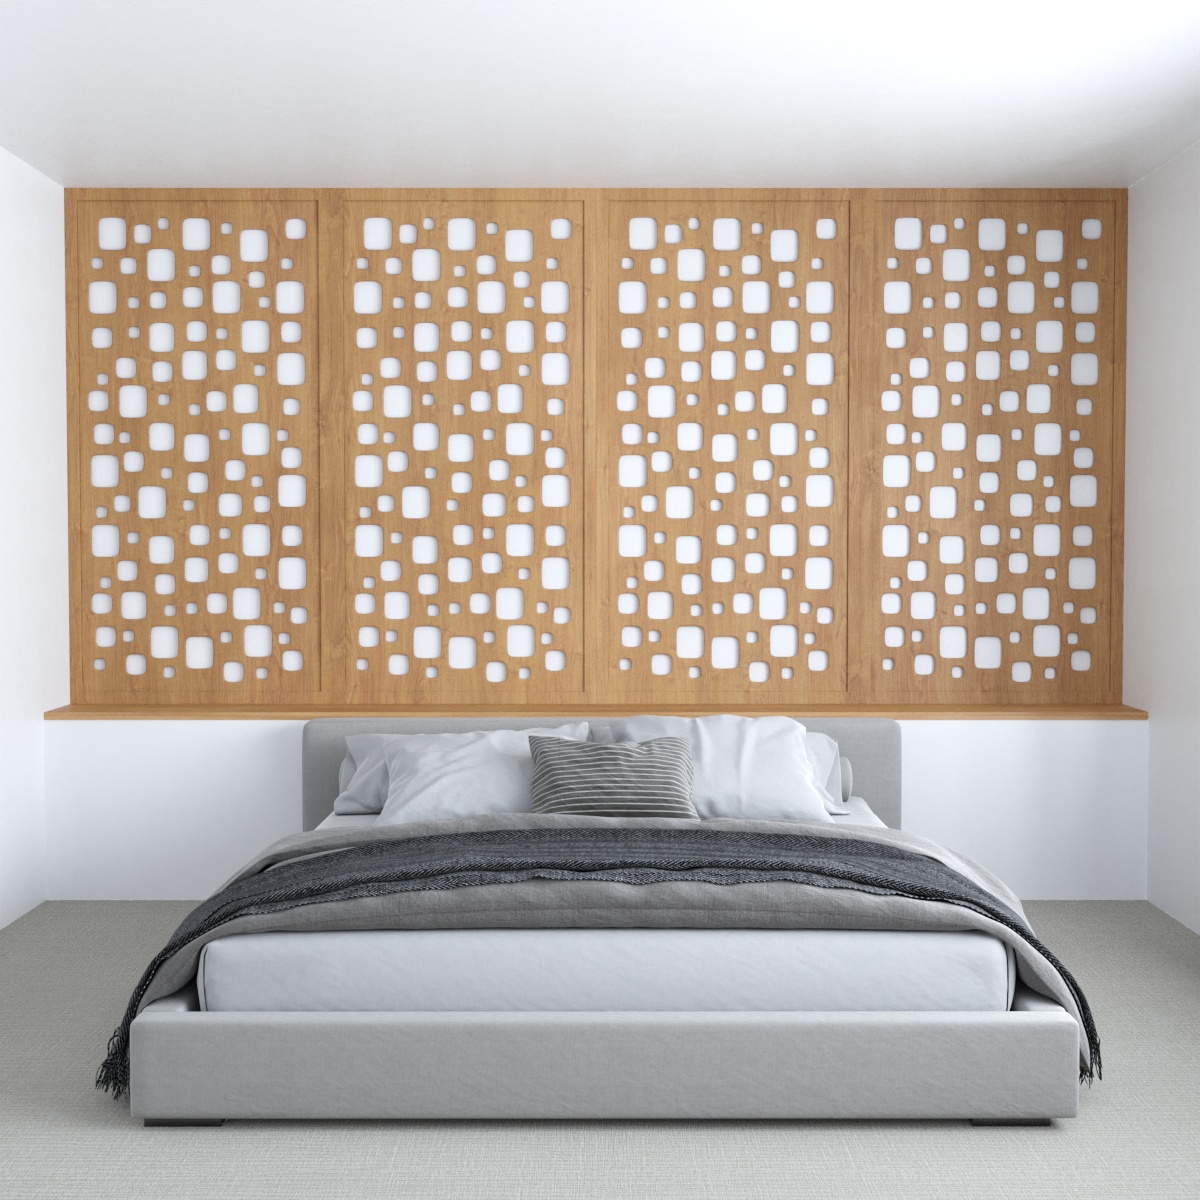 An accent wall could be made by combining a series of wood panels that have had various shapes cut out of them, creating a screen that shows glimpses of the wall behind them.